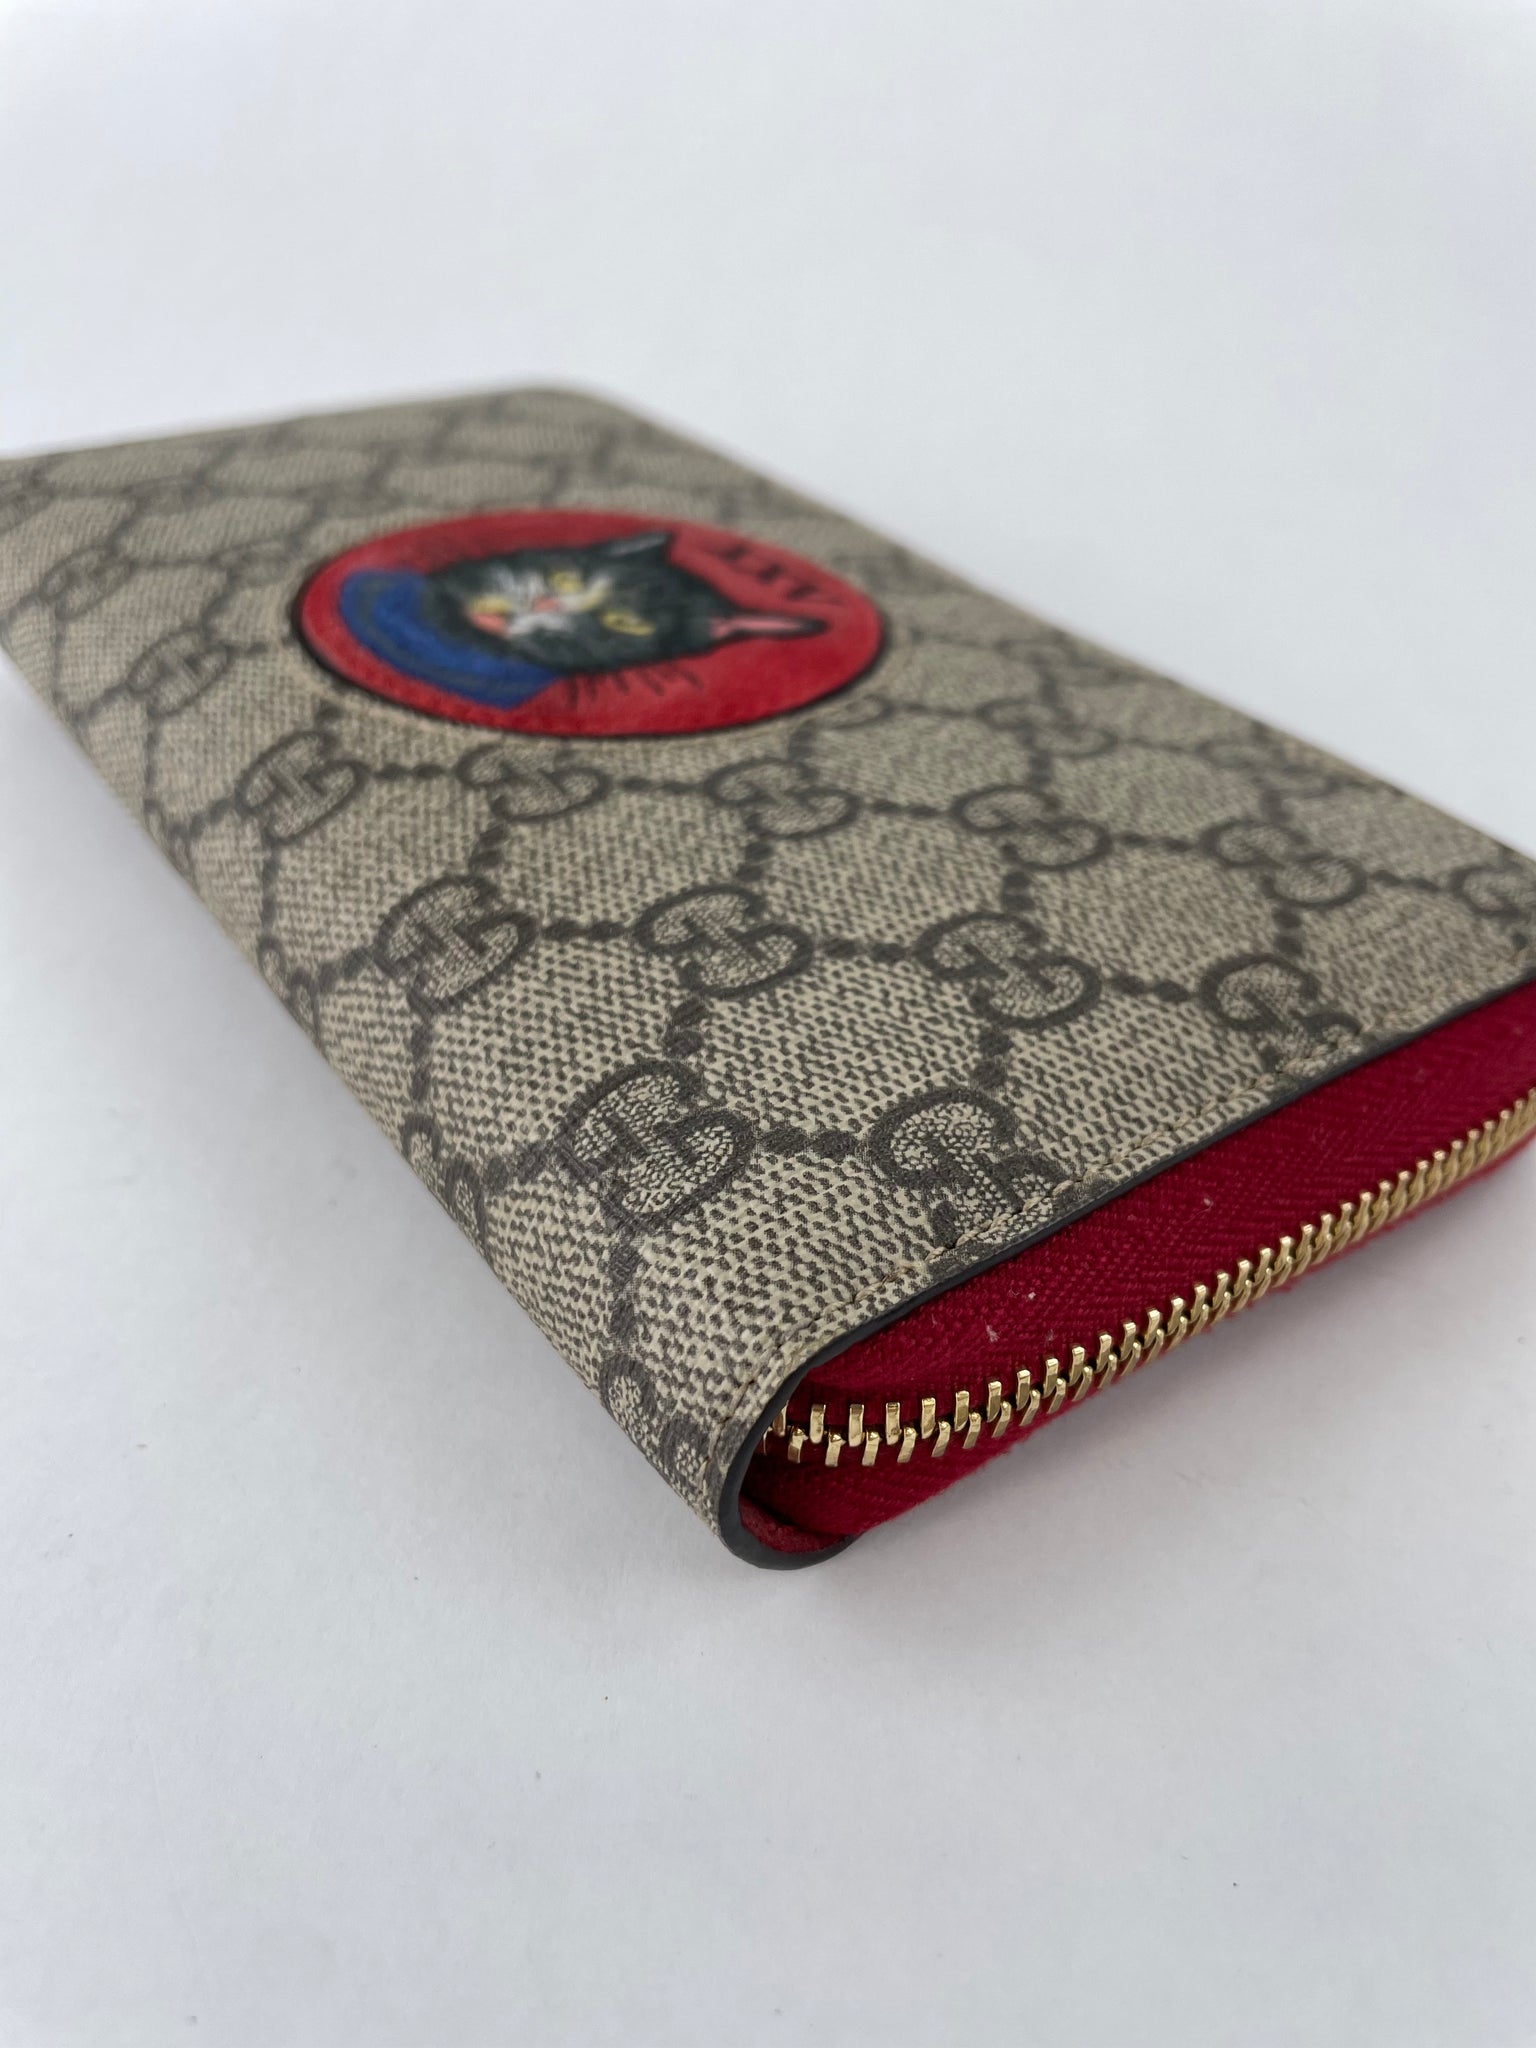 Authenticated used Gucci Gucci Round Zipper Long Wallet GG Supreme Beige/Red Cat 506279 Good Condition Unused Women's Men's, Adult Unisex, Size: (